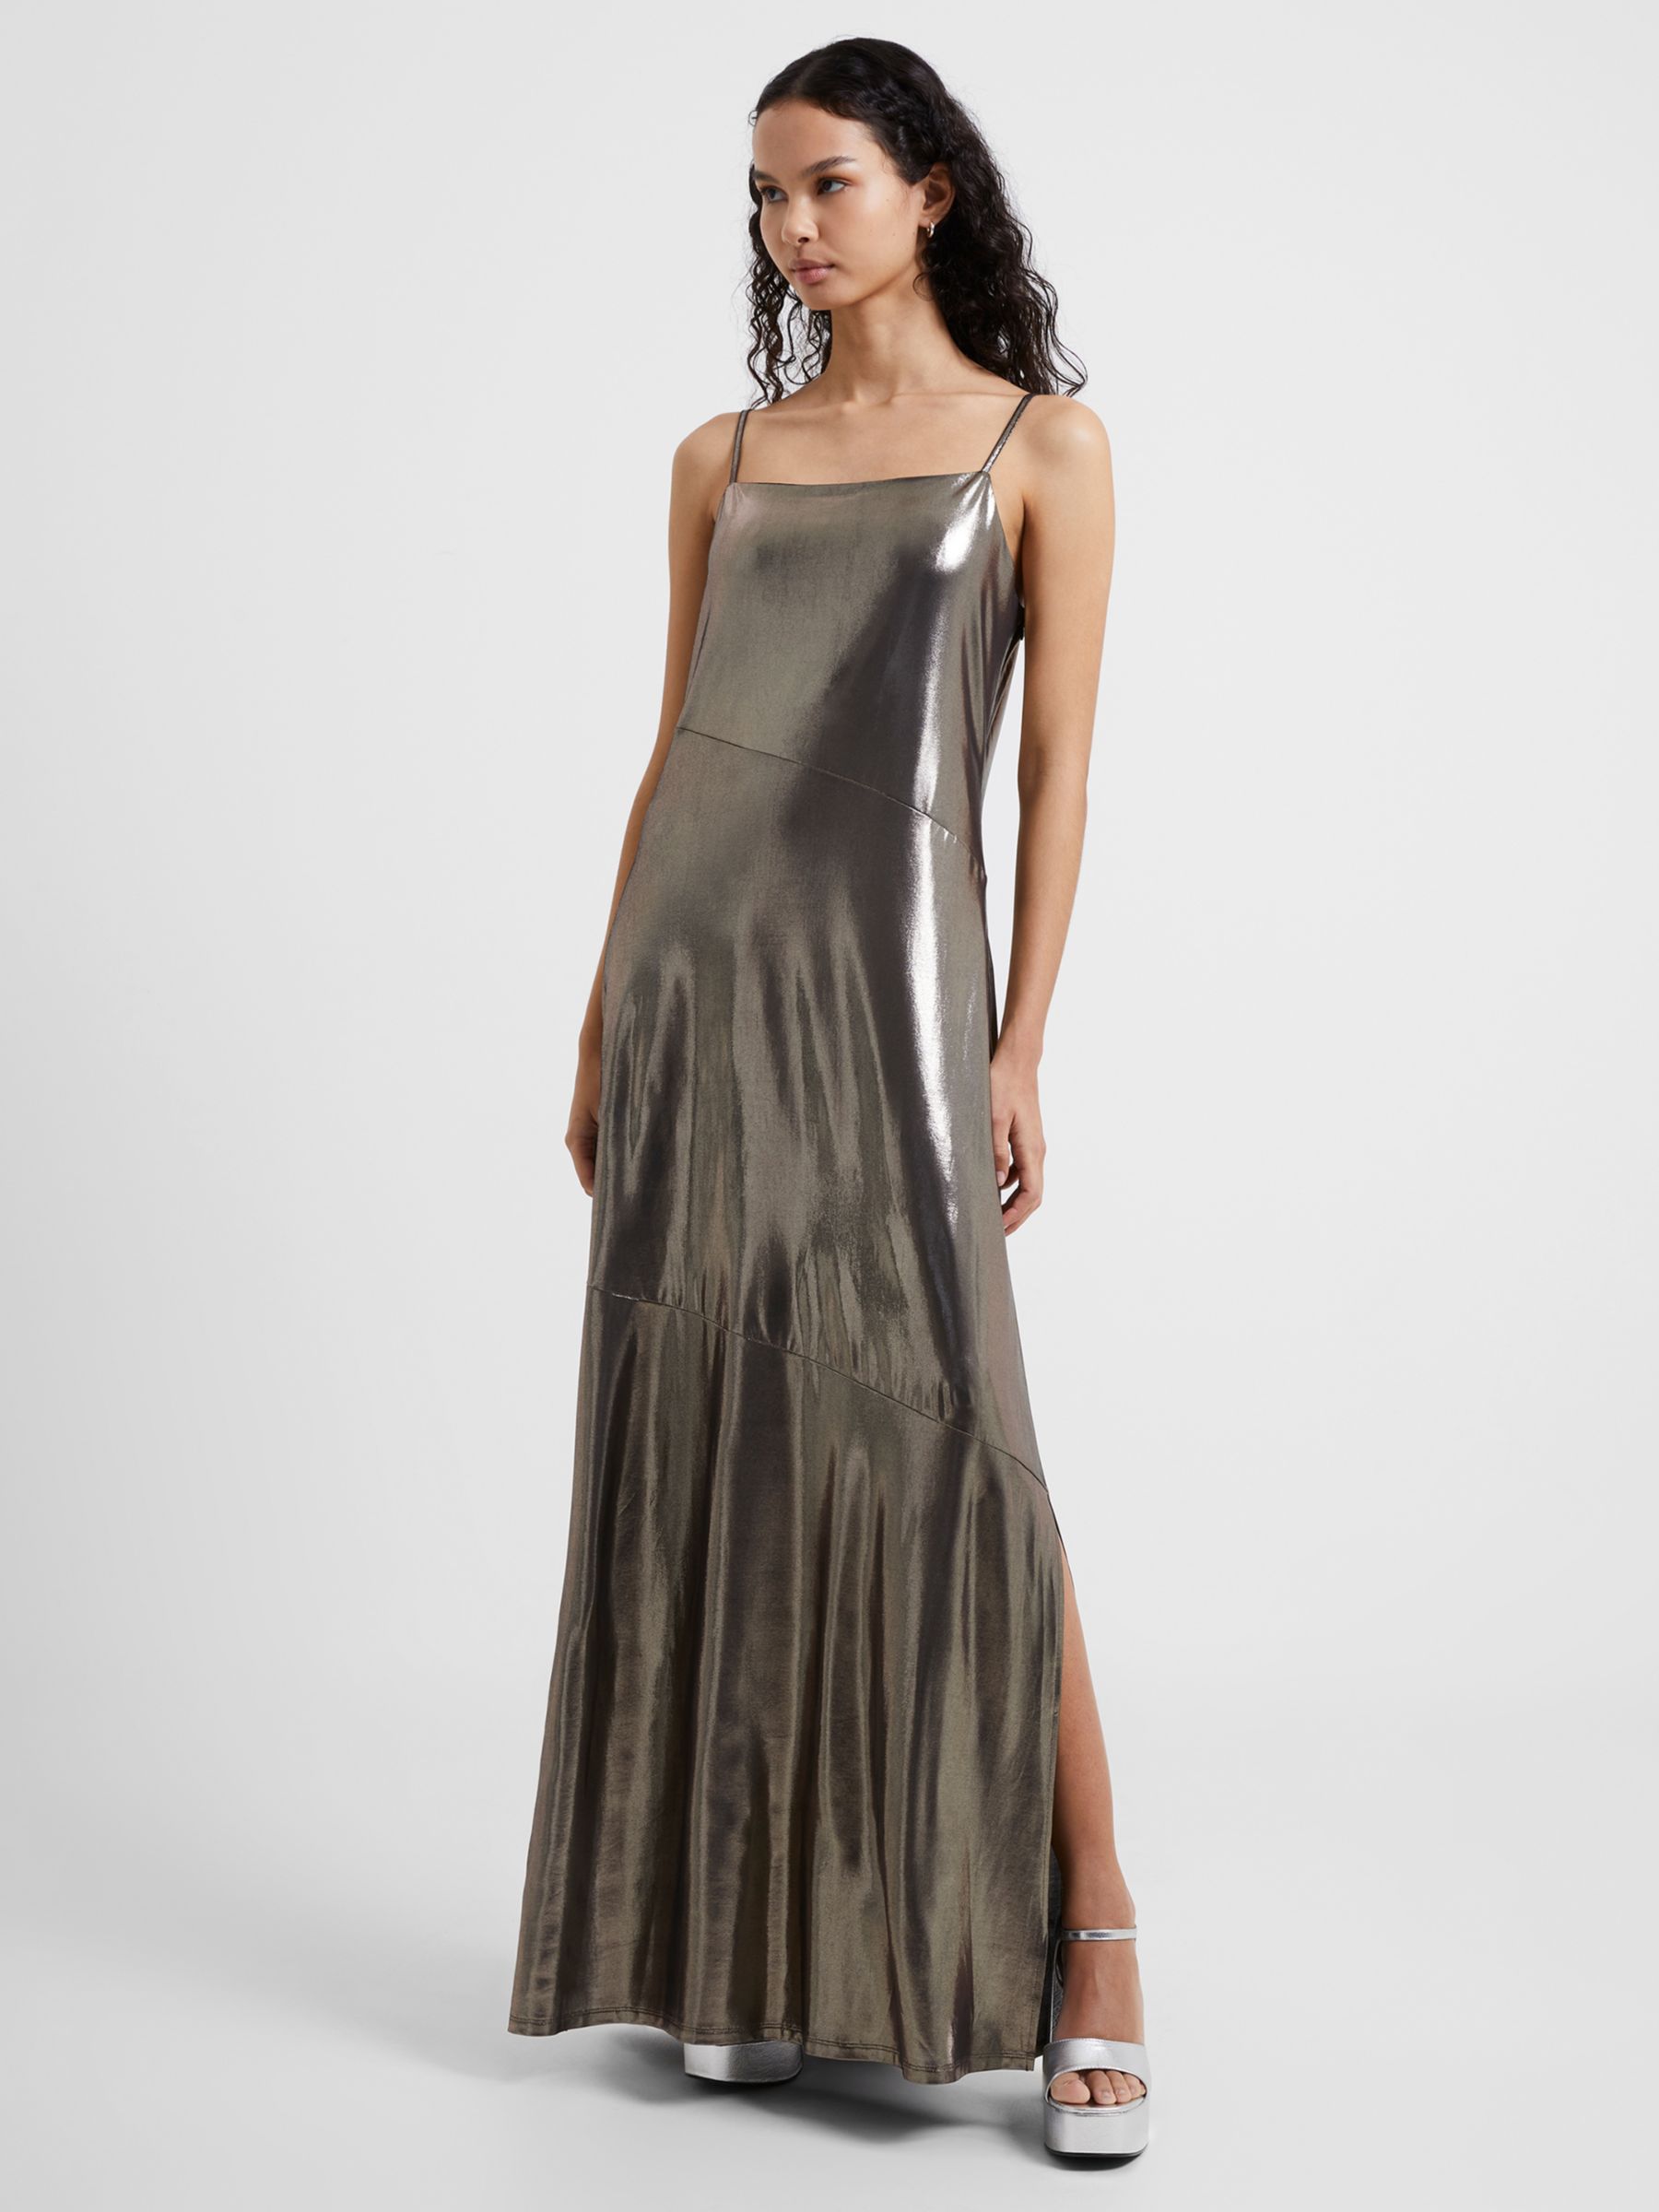 French Connection Ronja Liquid Metal Slip Maxi Dress, Silver, 10